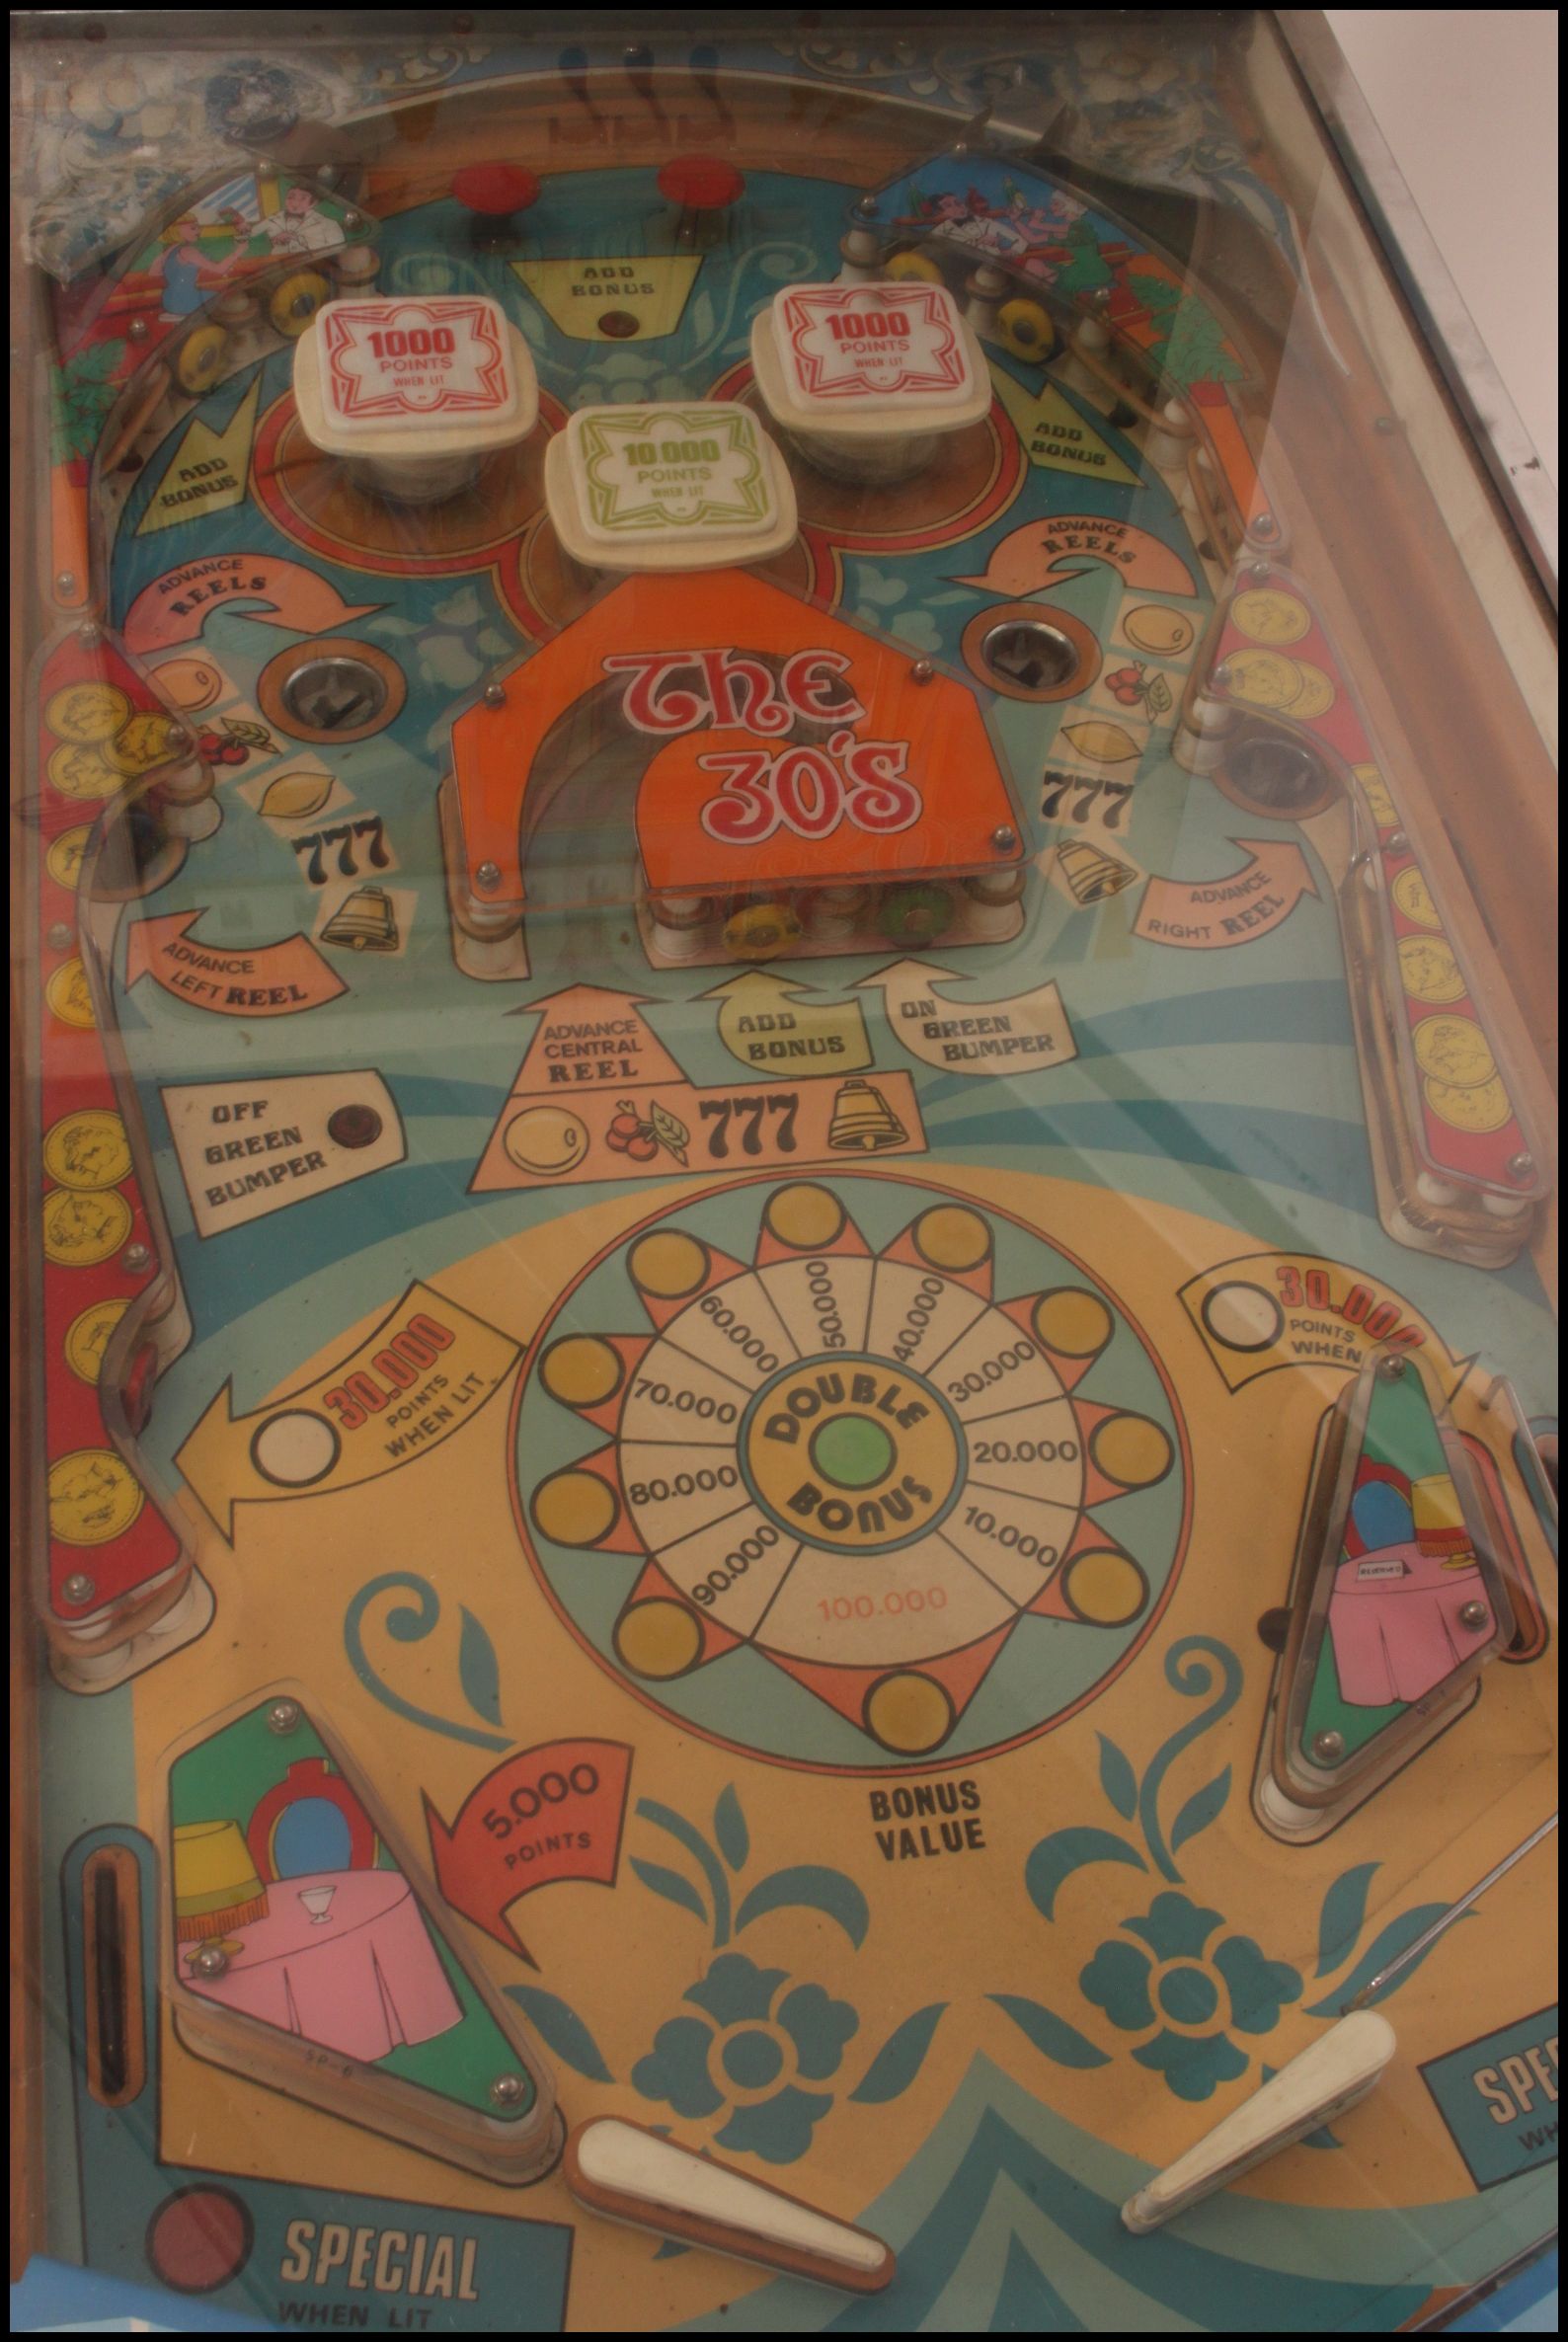 A 1977 Playmatic 777 ' The 30's ' Pinball Machine ( Pin Ball ) dating to the 1970's raised on - Image 8 of 11